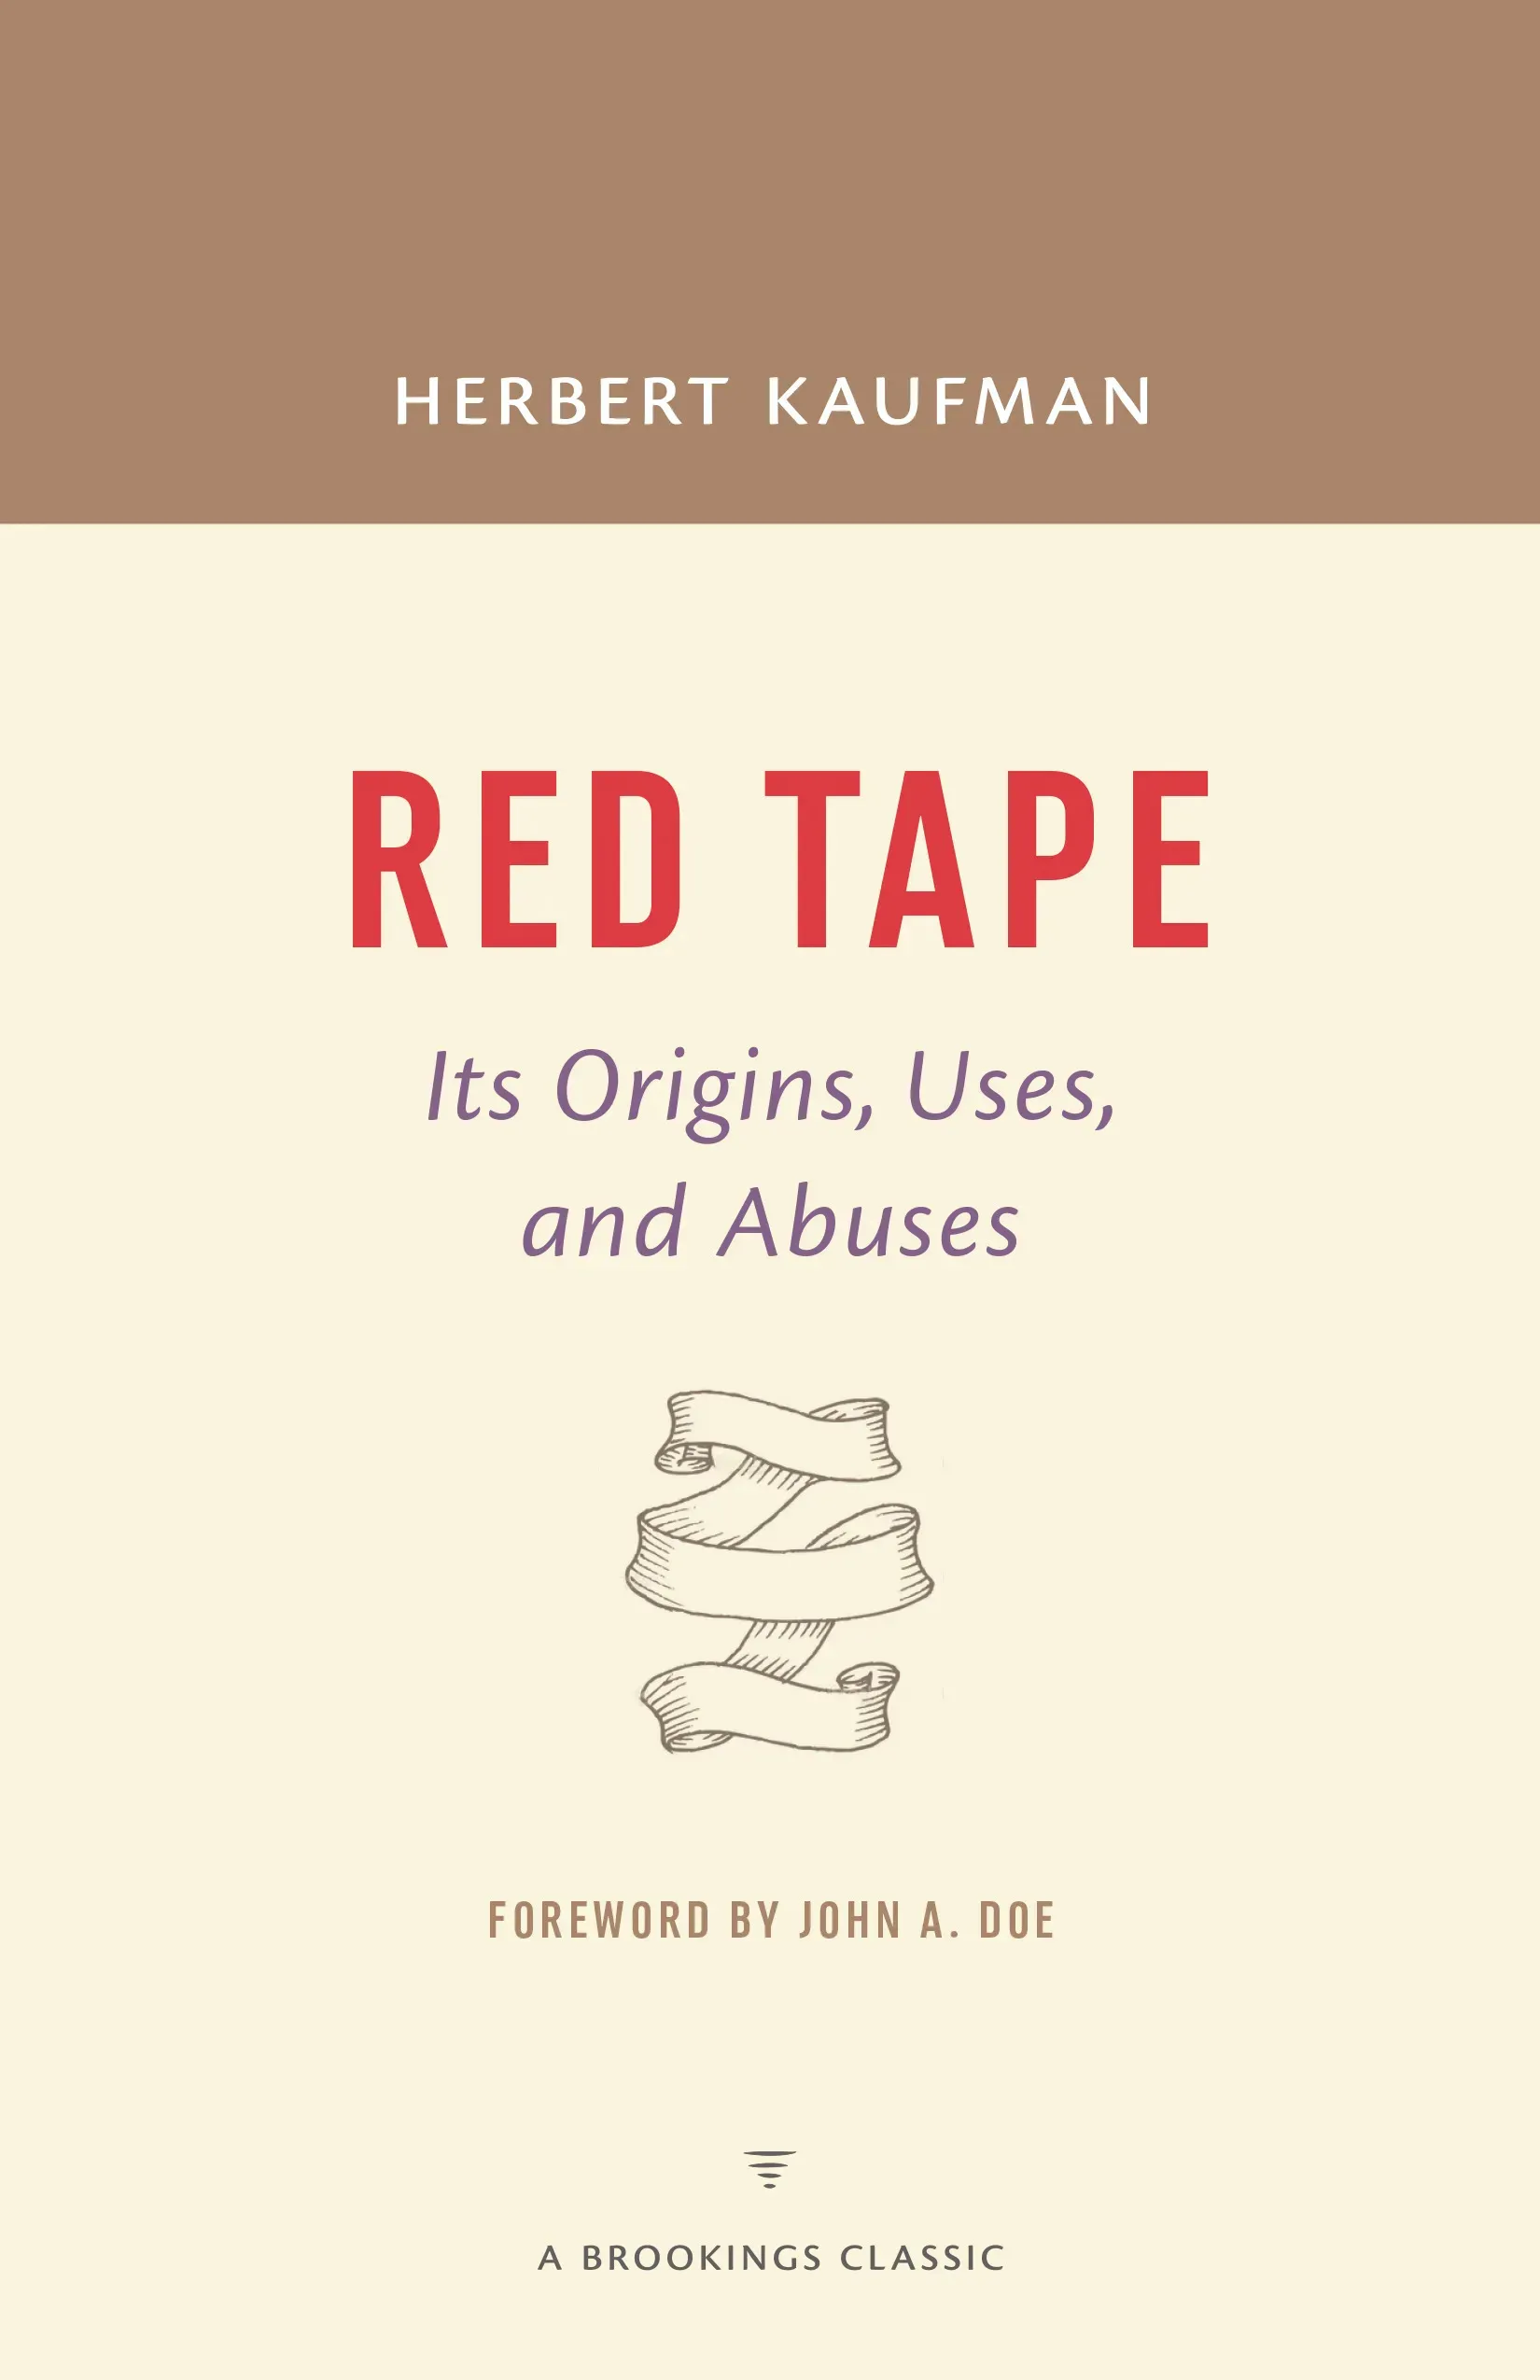 Cover of the book title Red Tape